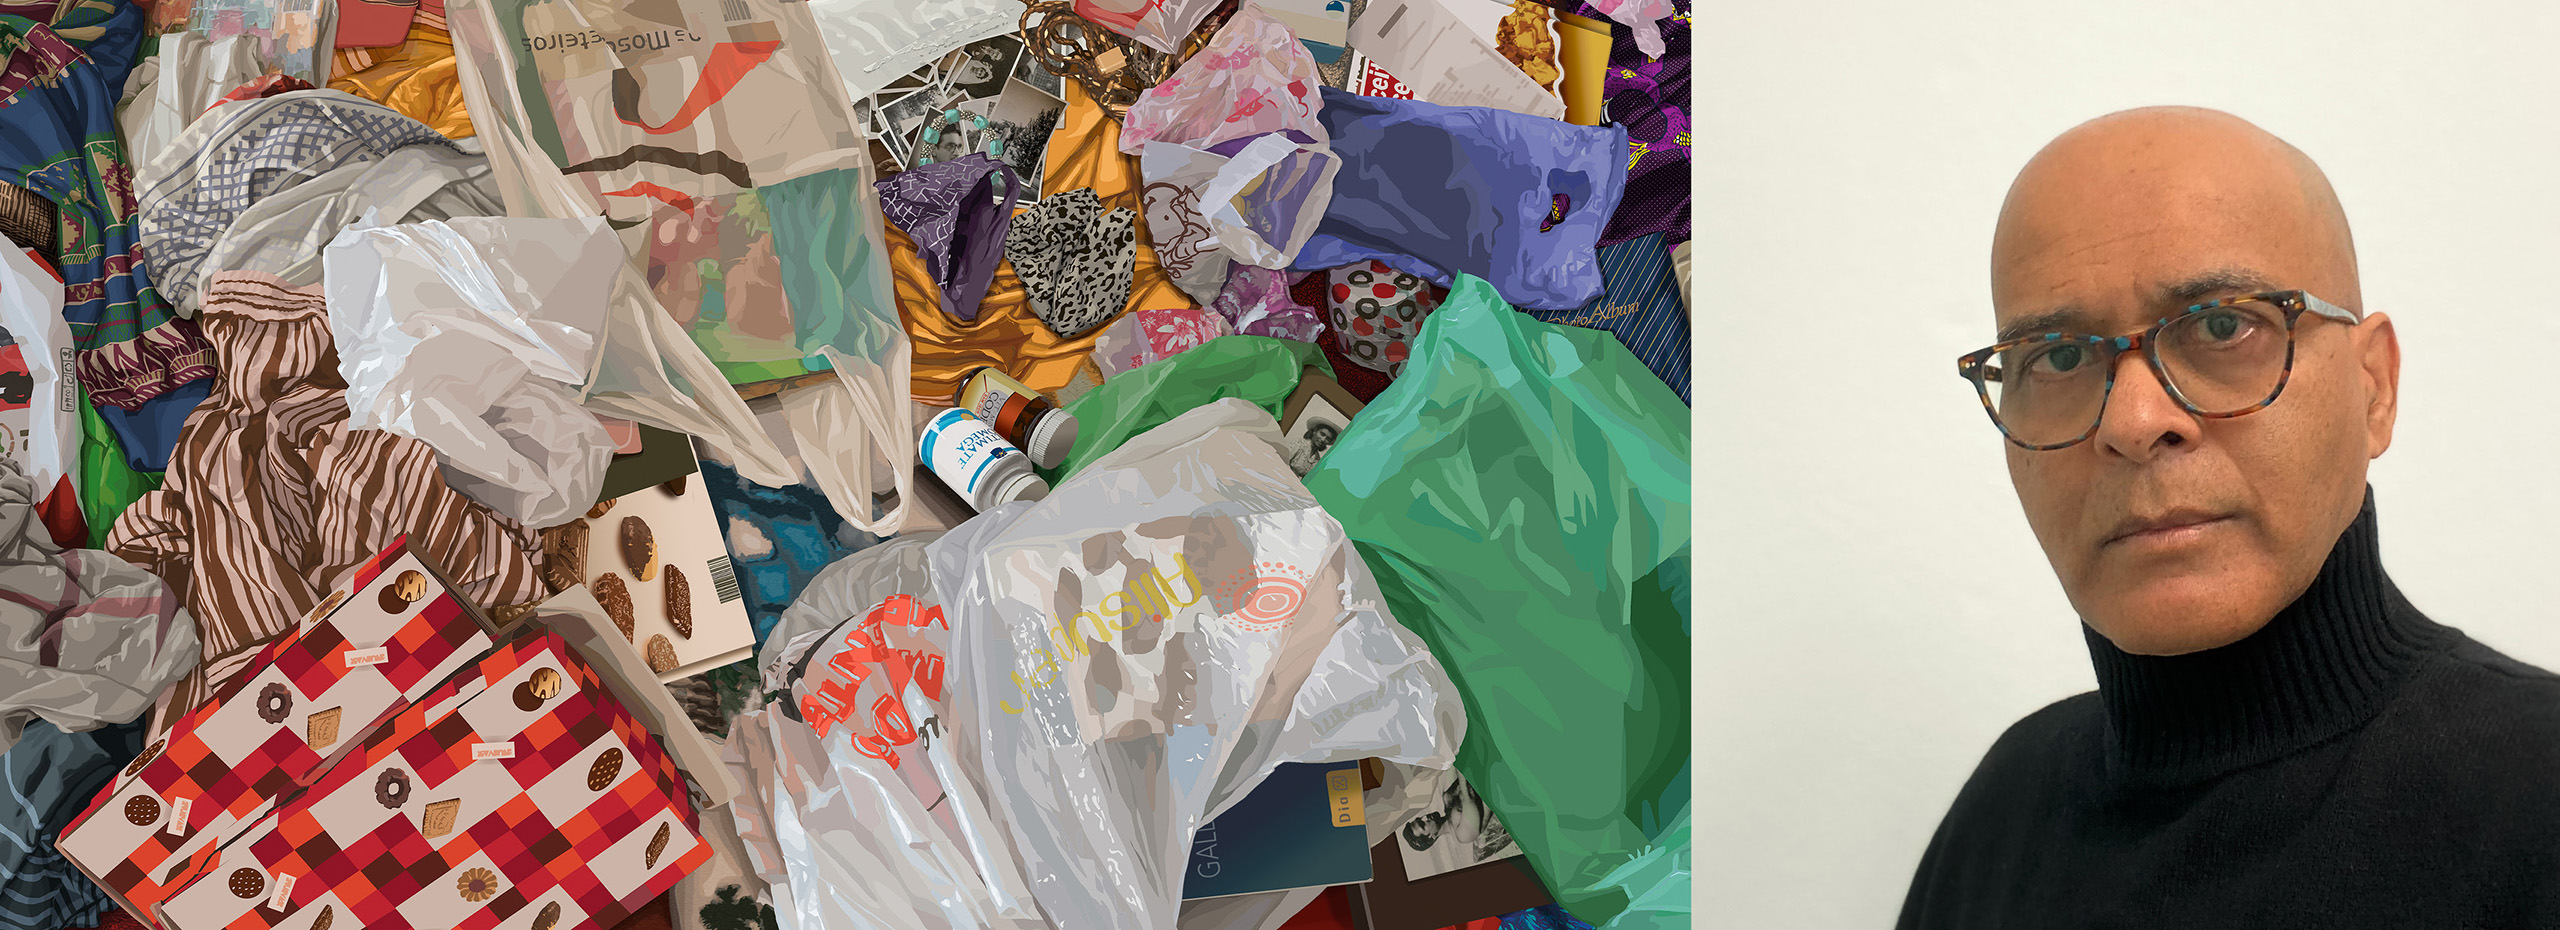 Artwork depicting a pile of packages, bags, and other items with a headshot of the artist wearing glasses and a black turtleneck